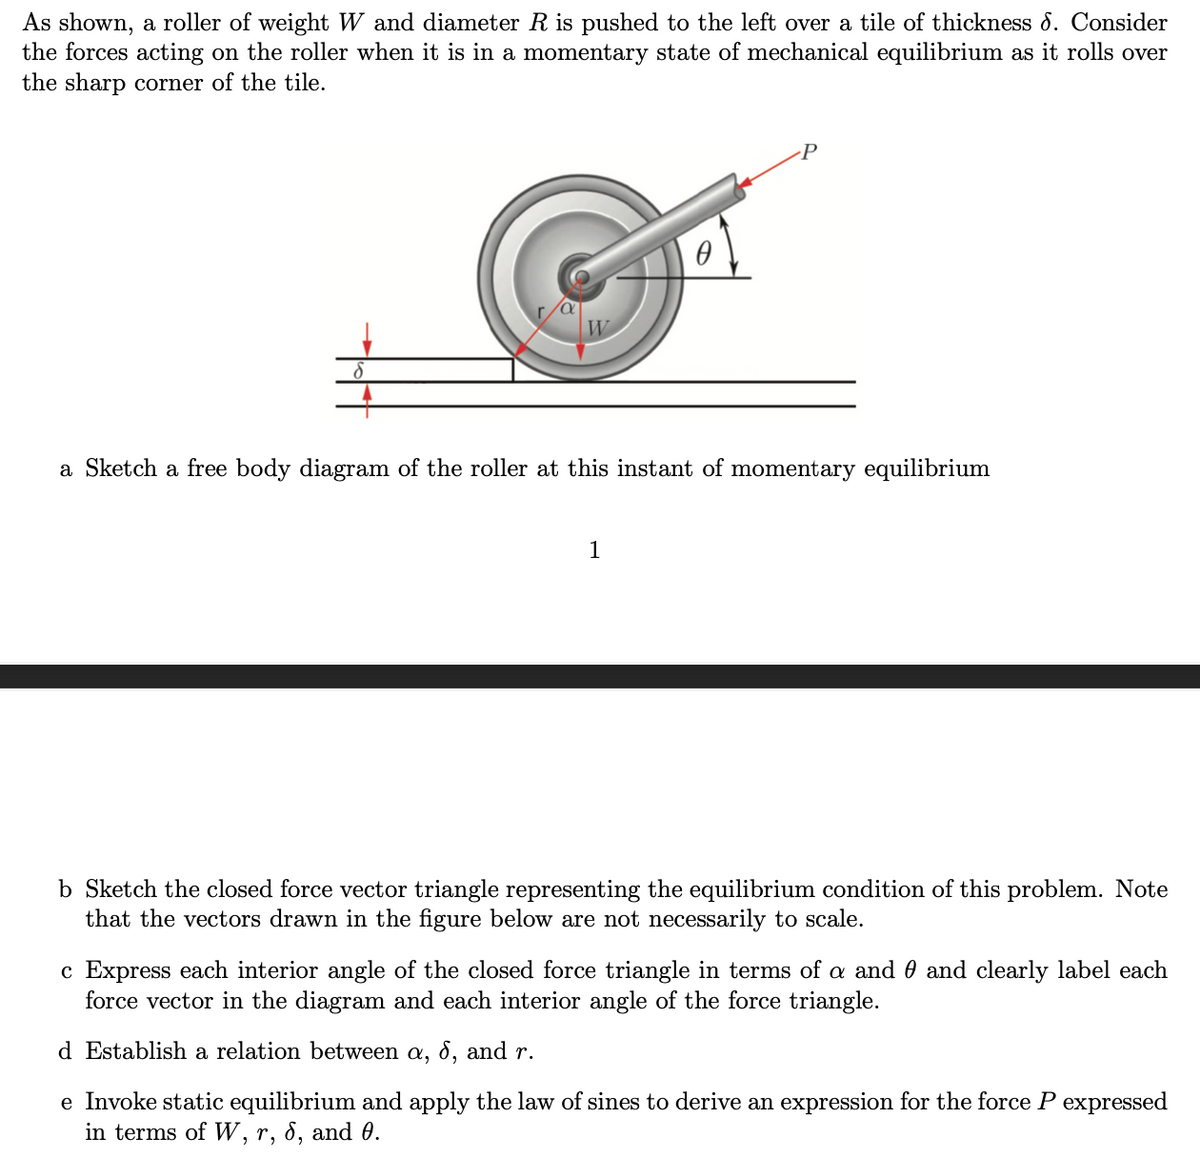 As shown, a roller of weight W and diameter R is pushed to the left over a tile of thickness 6. Consider
the forces acting on the roller when it is in a momentary state of mechanical equilibrium as it rolls over
the sharp corner of the tile.
Ө
1
P
a Sketch a free body diagram of the roller at this instant of momentary equilibrium
b Sketch the closed force vector triangle representing the equilibrium condition of this problem. Note
that the vectors drawn in the figure below are not necessarily to scale.
c Express each interior angle of the closed force triangle in terms of a and and clearly label each
force vector in the diagram and each interior angle of the force triangle.
d Establish a relation between a, 6, and r.
e Invoke static equilibrium and apply the law of sines to derive an expression for the force P expressed
in terms of W, r, 6, and 0.